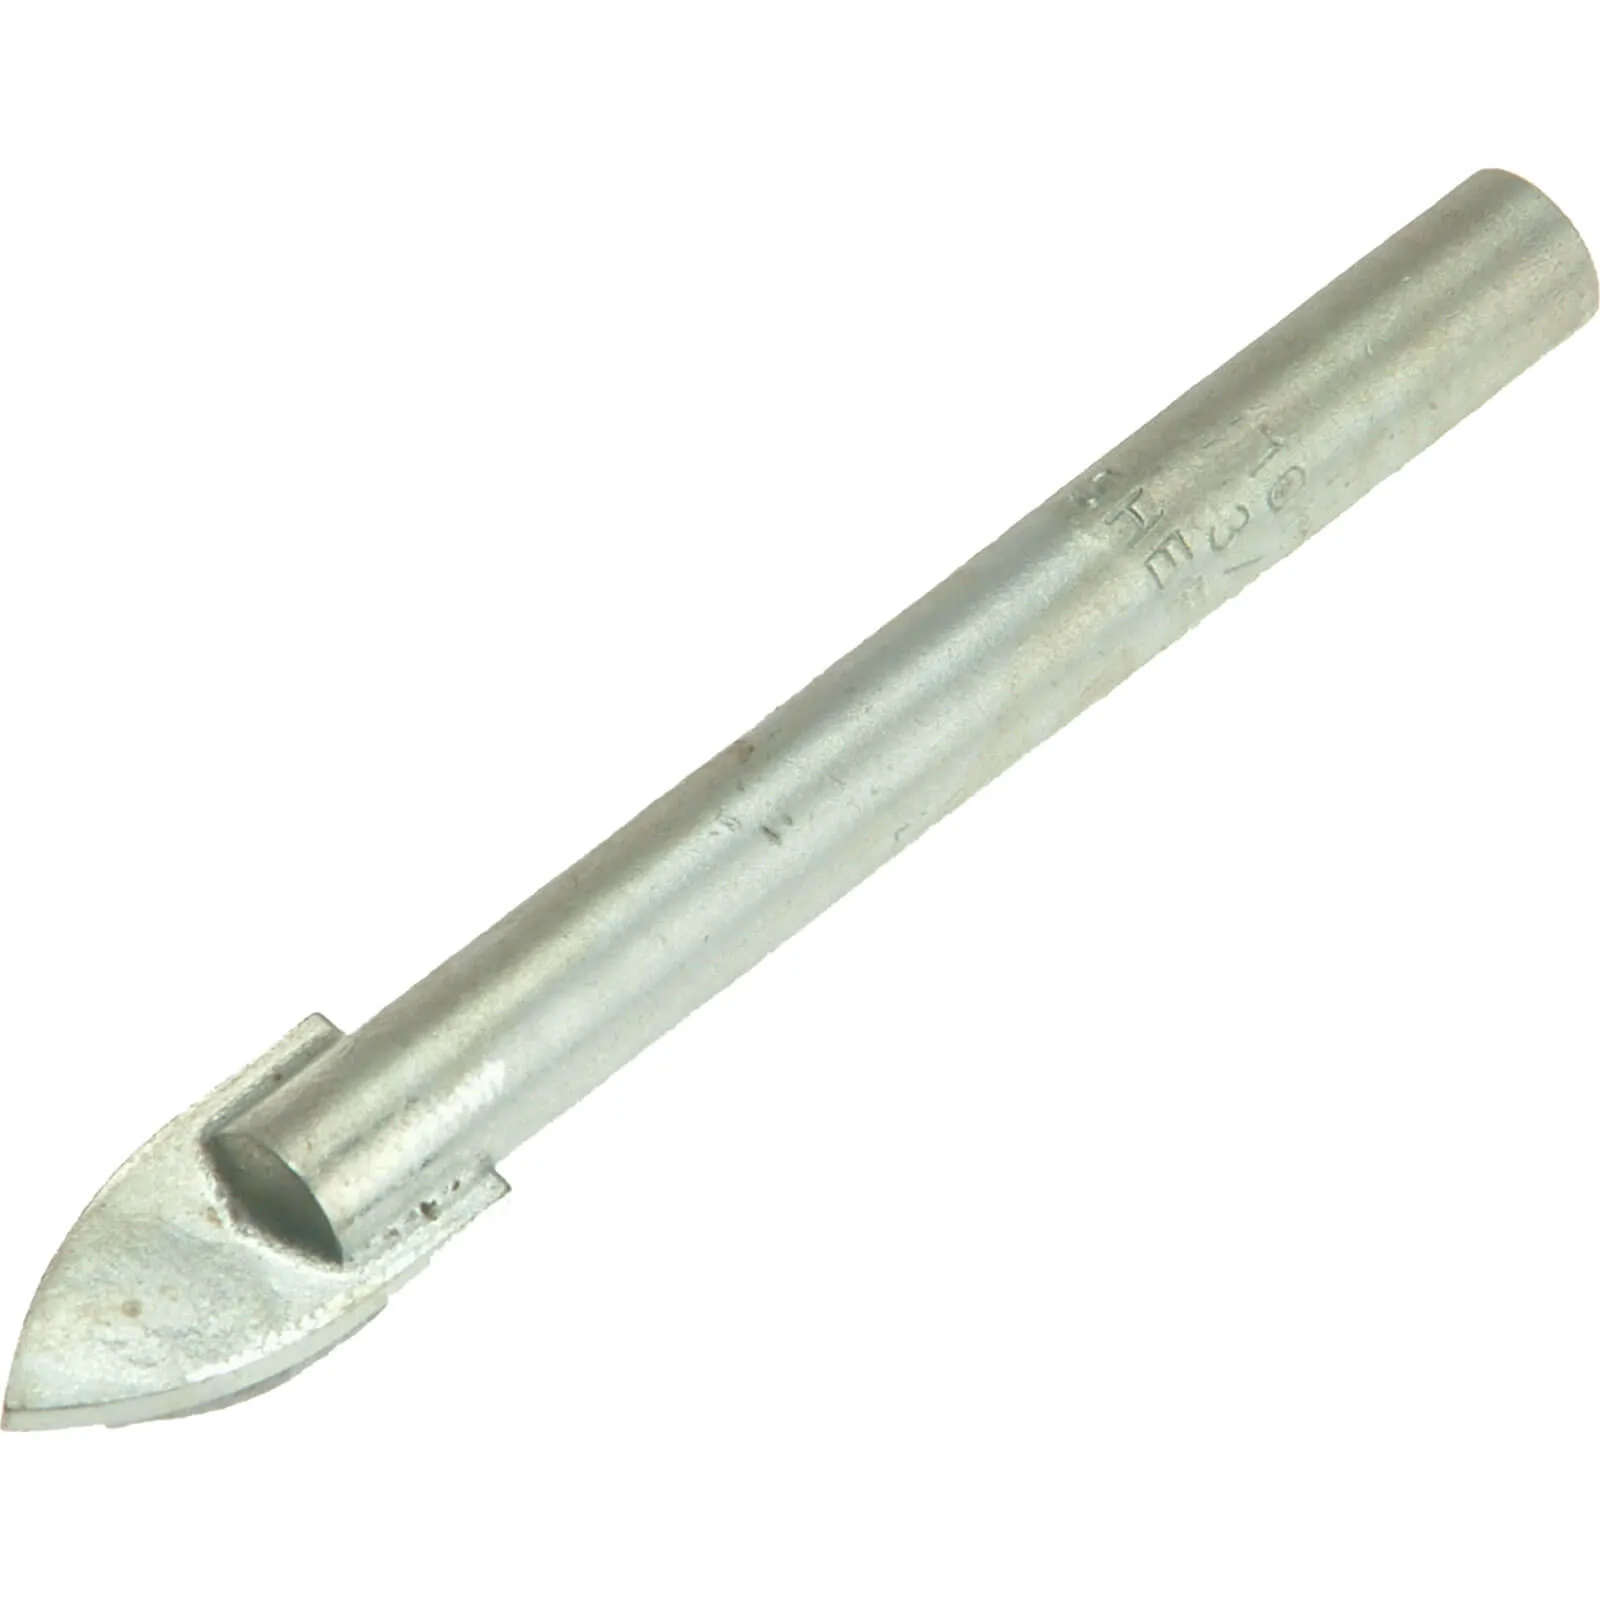 Vitrex TCT Tile and Glass Drill Bit - 10mm